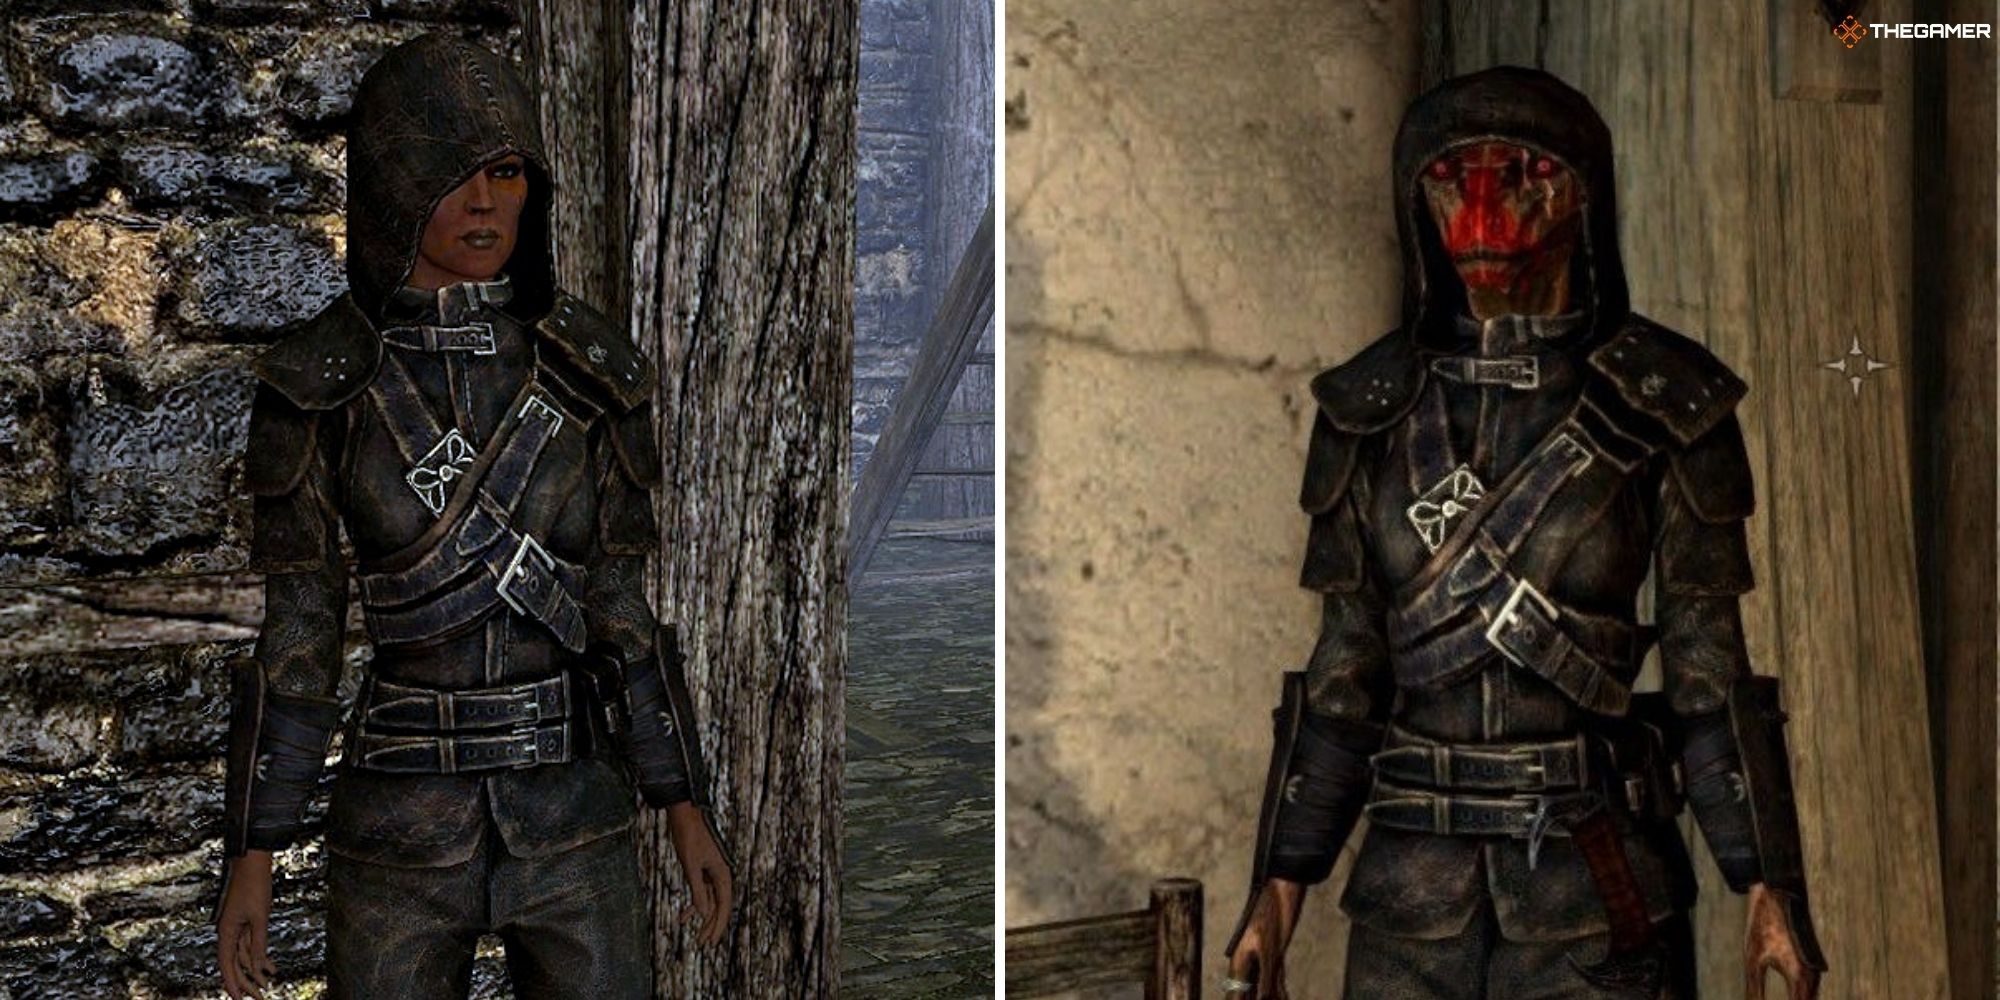 Skyrim - Guild Masters Armor worn by the player, split image